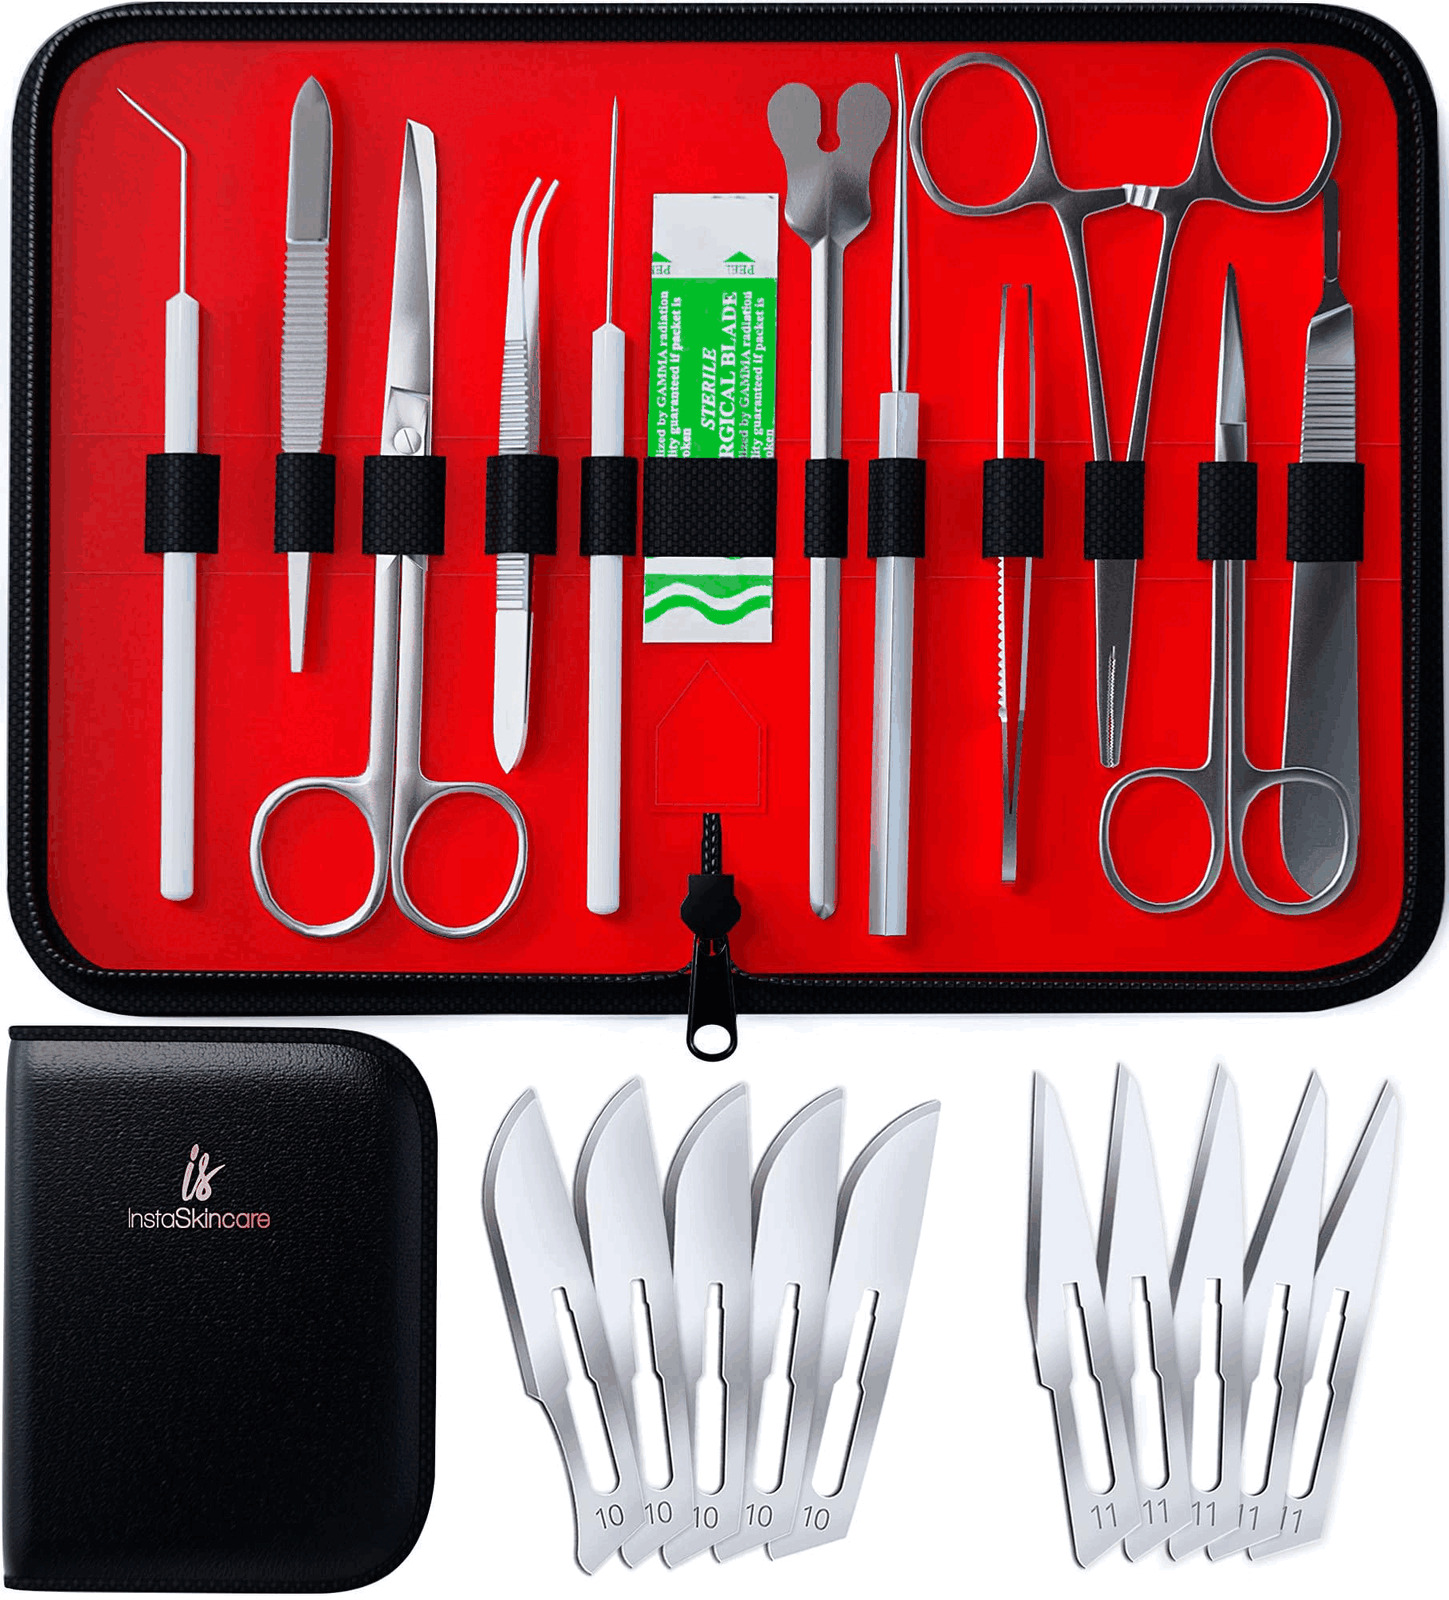 Advanced Dissection Kit Biology Lab Anatomy Dissecting Set with Stainless Steel